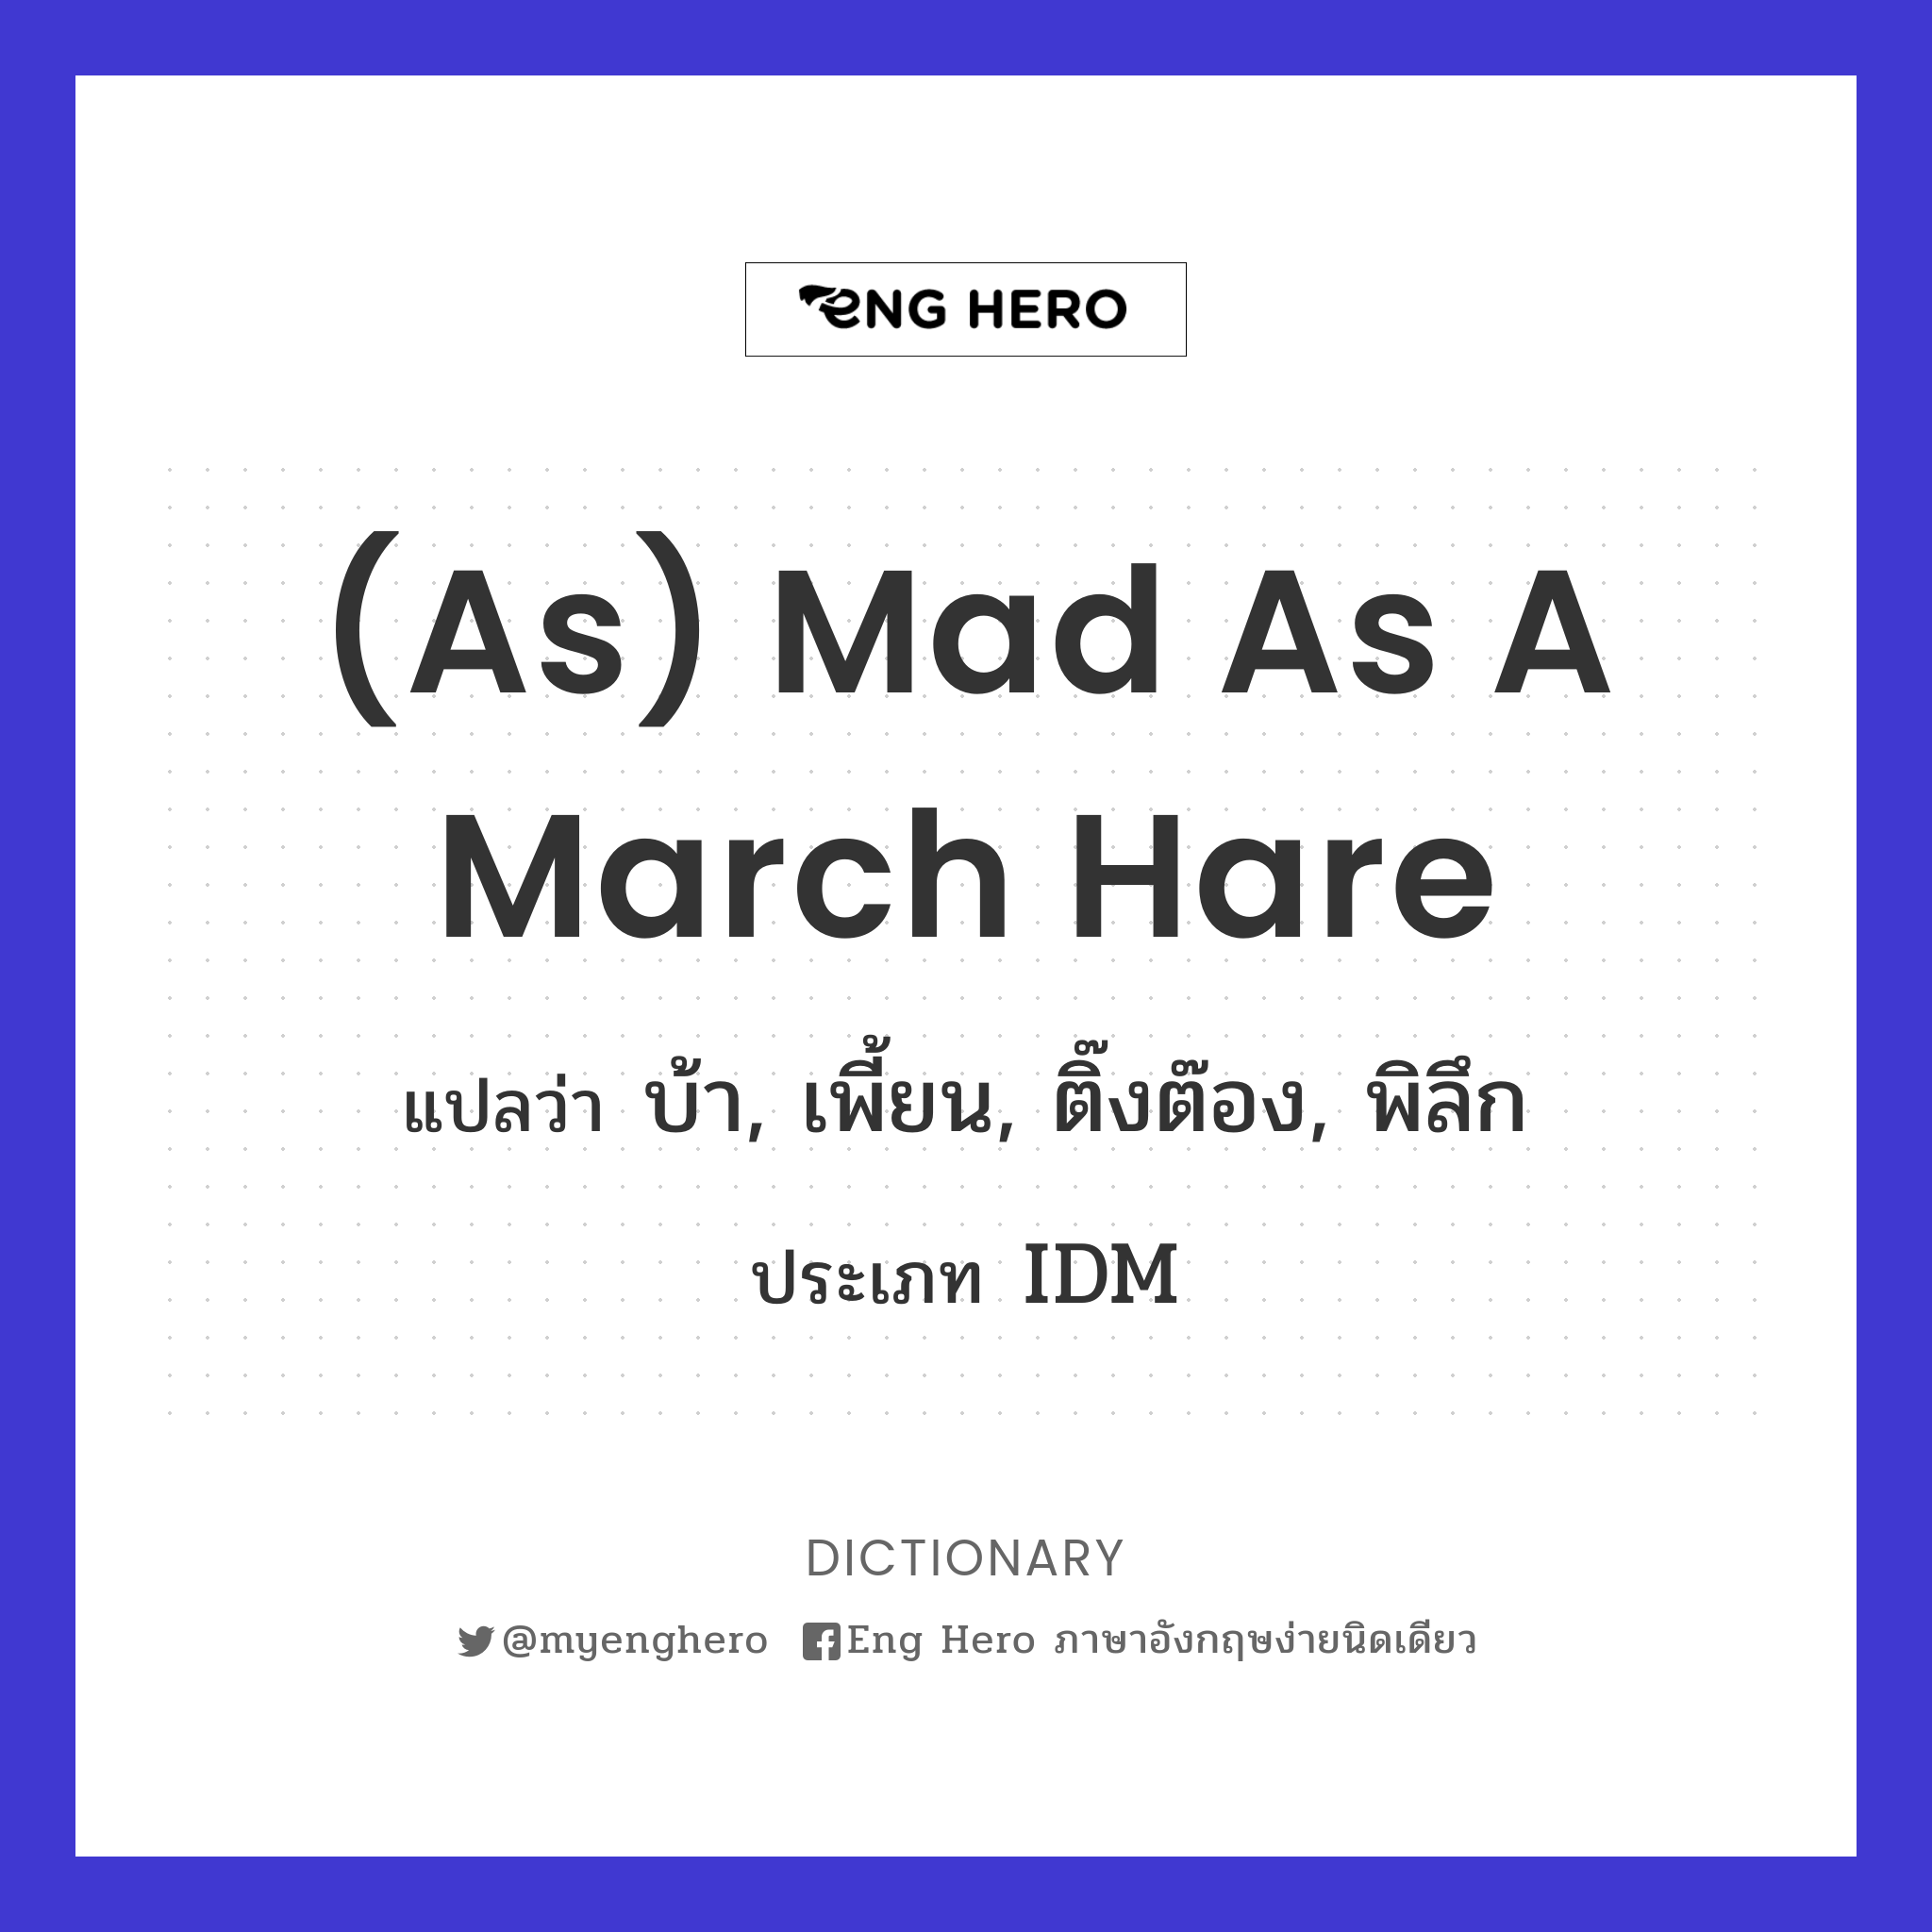 (as) mad as a March hare